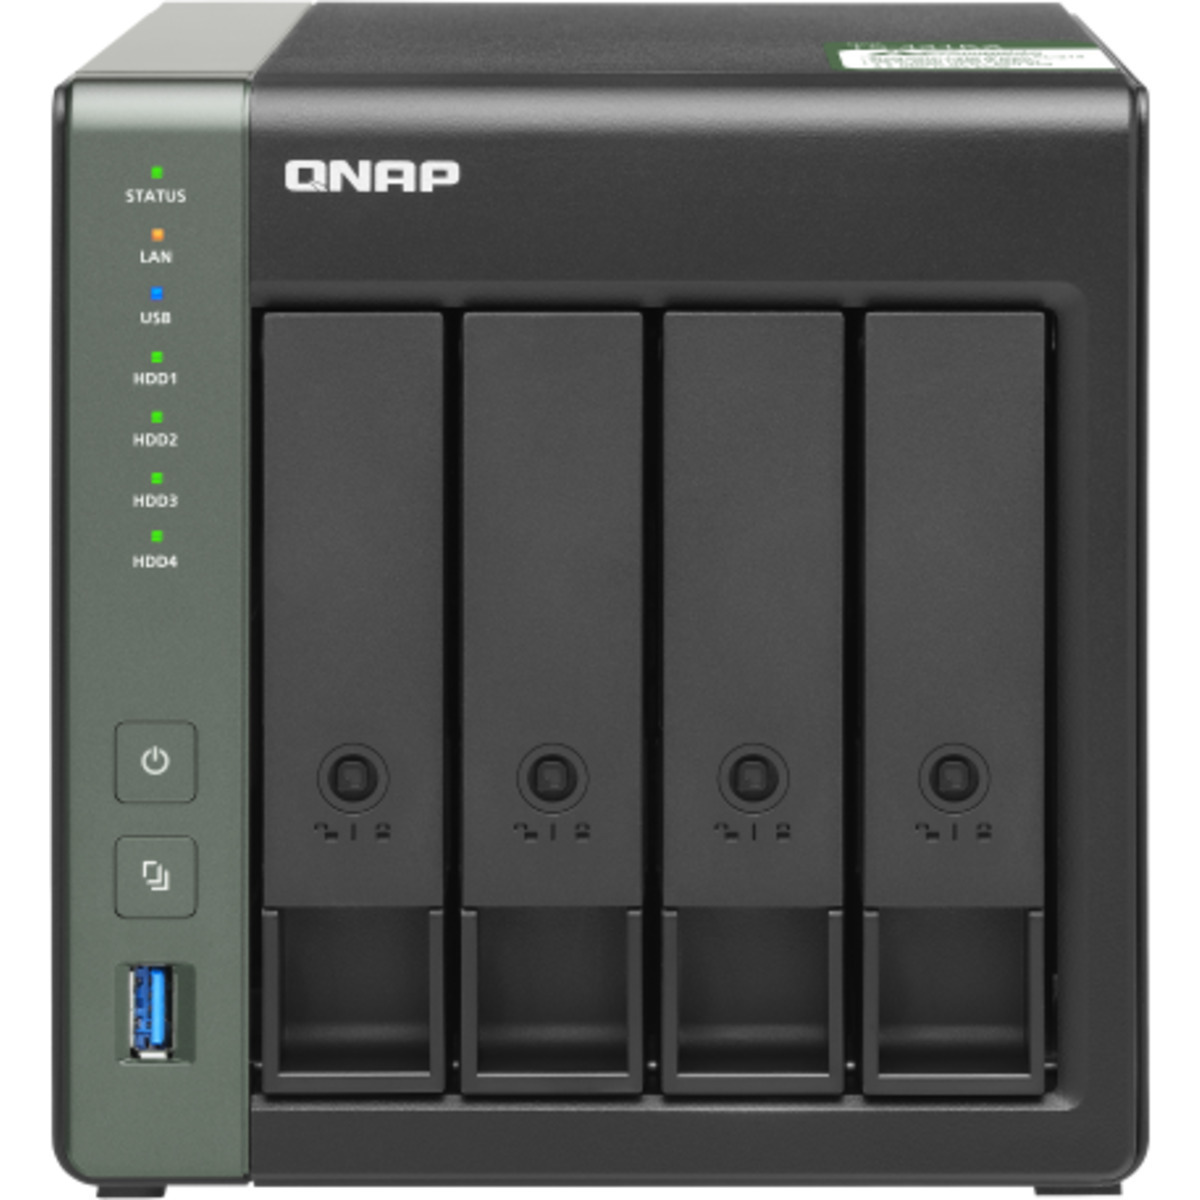 buy $1013 QNAP TS-431KX 16tb Desktop NAS - Network Attached Storage Device 4x4000gb Western Digital Blue WD40EZRZ 3.5 5400rpm SATA 6Gb/s HDD CONSUMER Class Drives Installed - Burn-In Tested - FREE RAM UPGRADE - nas headquarters buy network attached storage server device das new raid-5 free shipping usa christmas new year holiday sale TS-431KX